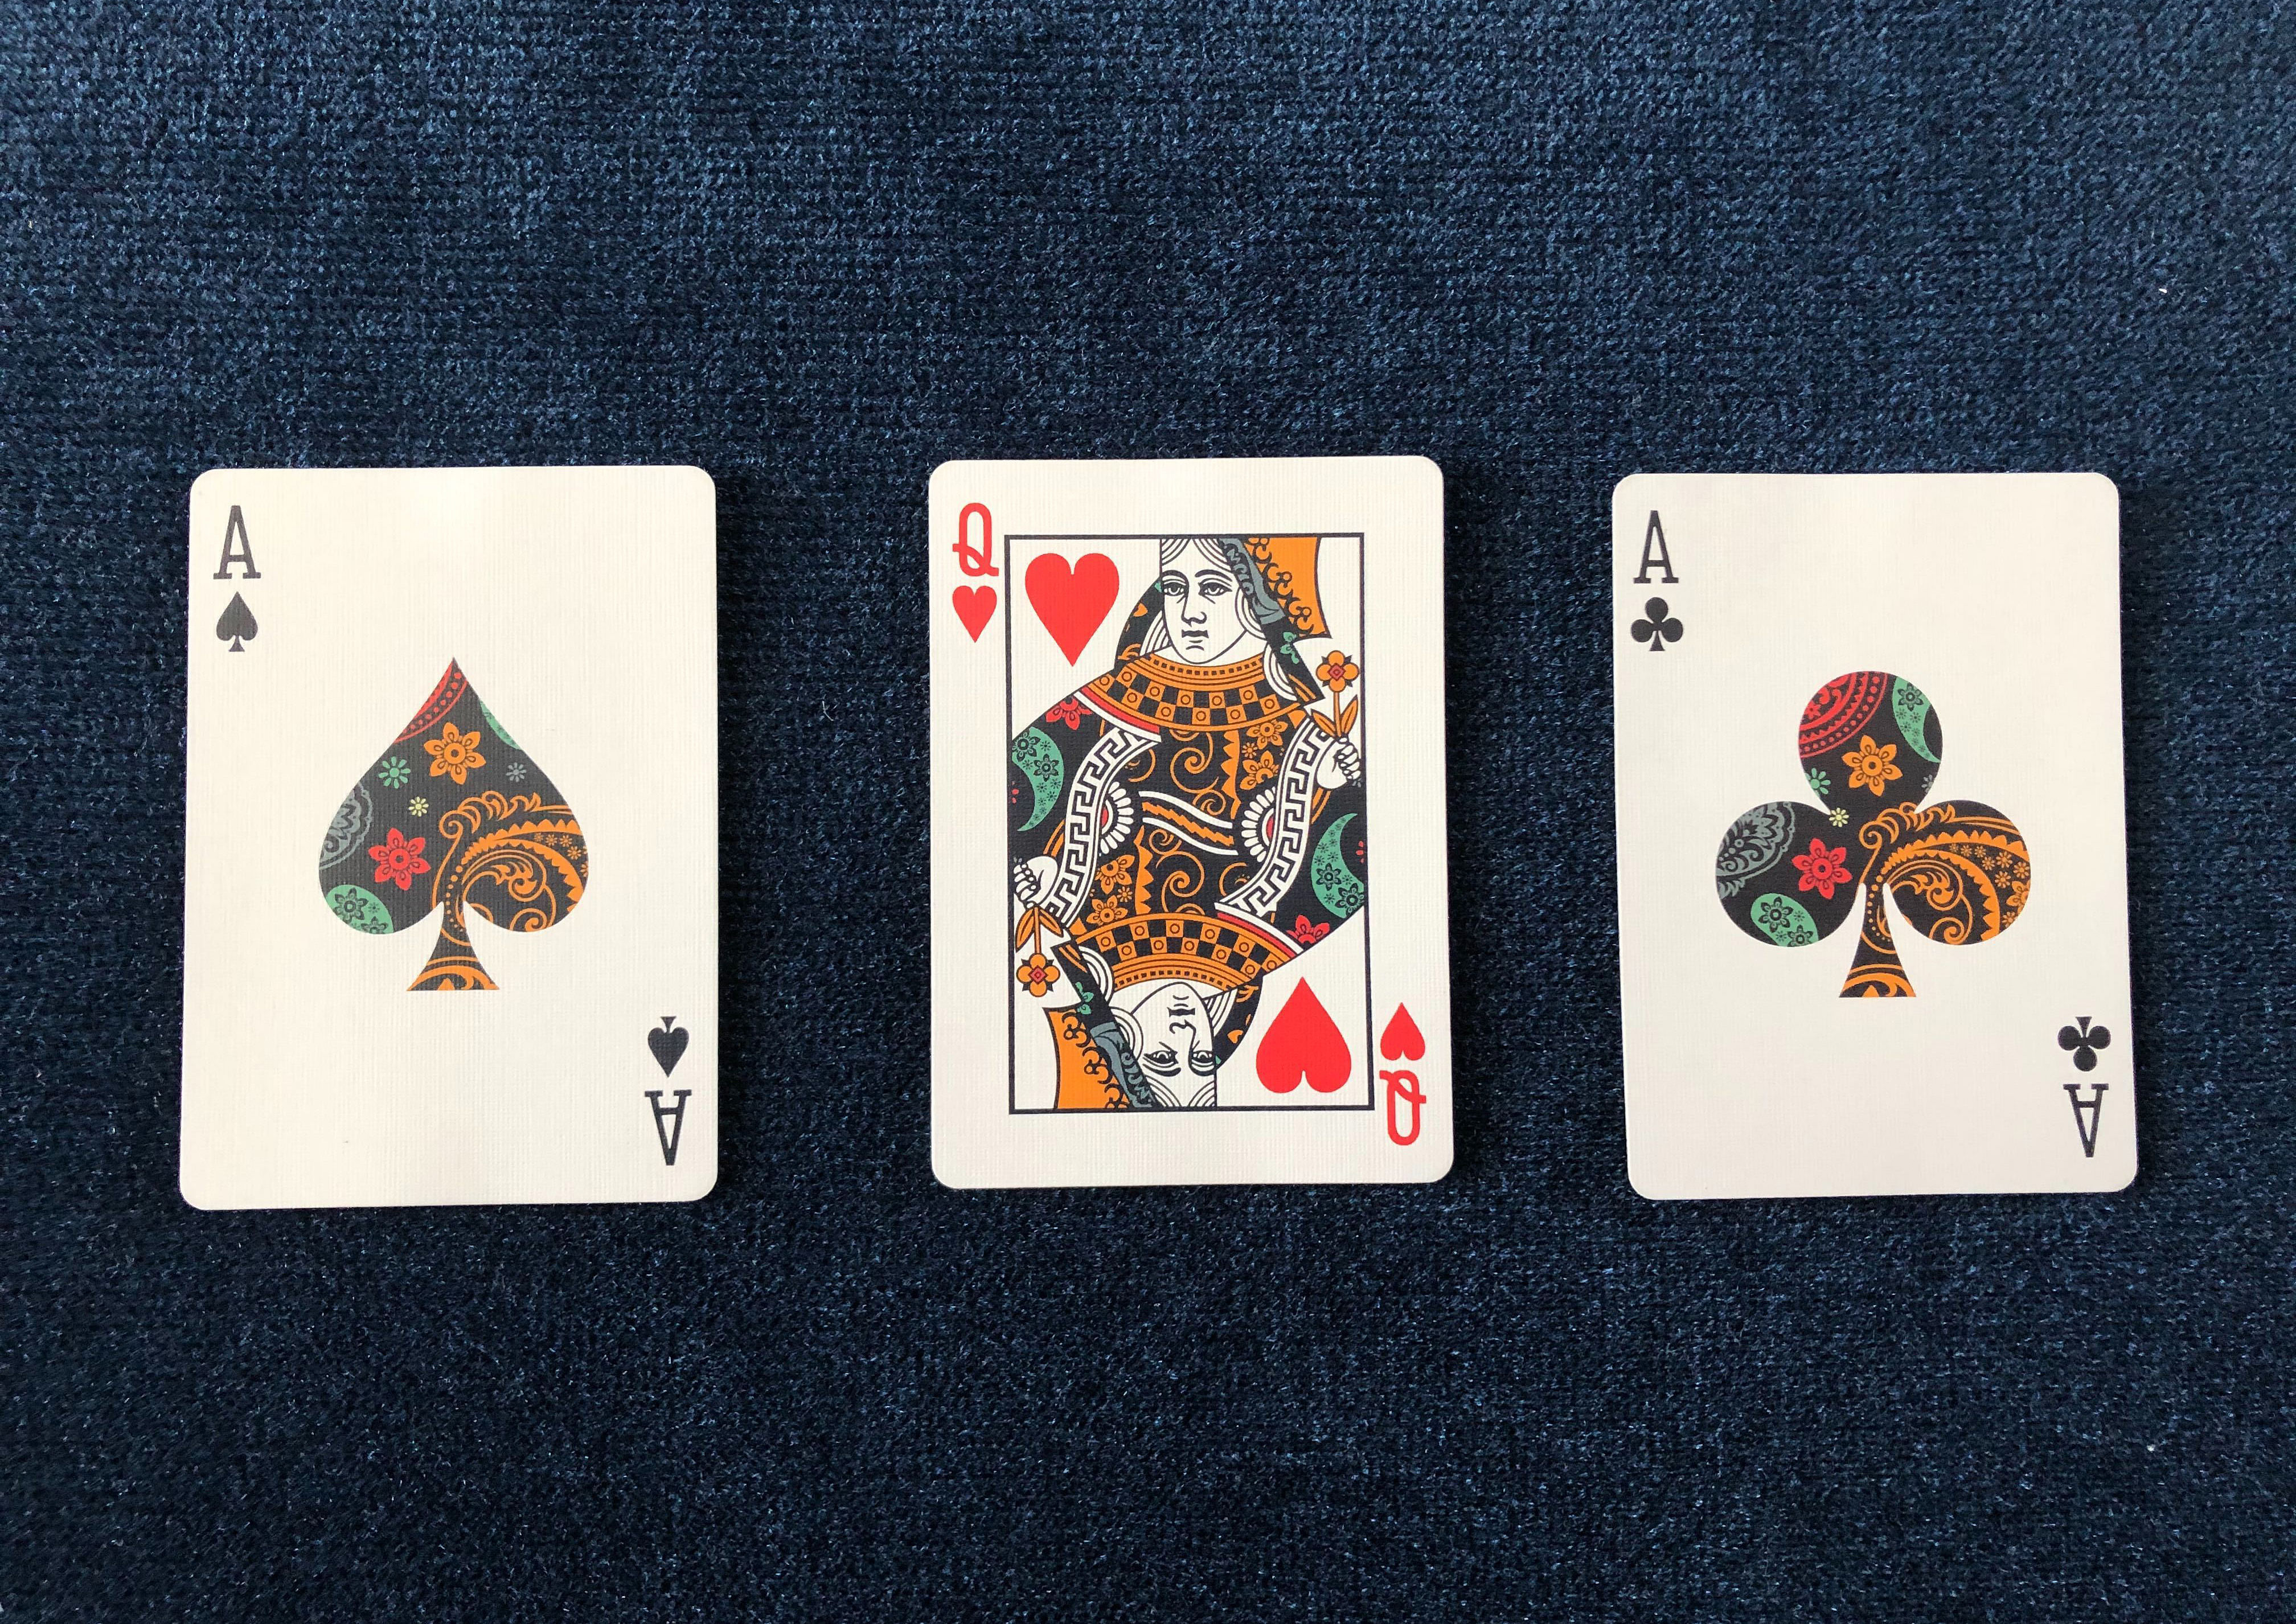 The Ace of Spades, Queen of Hearts and Ace of Clubs from the Dapper Deck Playing Cards are used on a blue close-up mat for an easy card trick